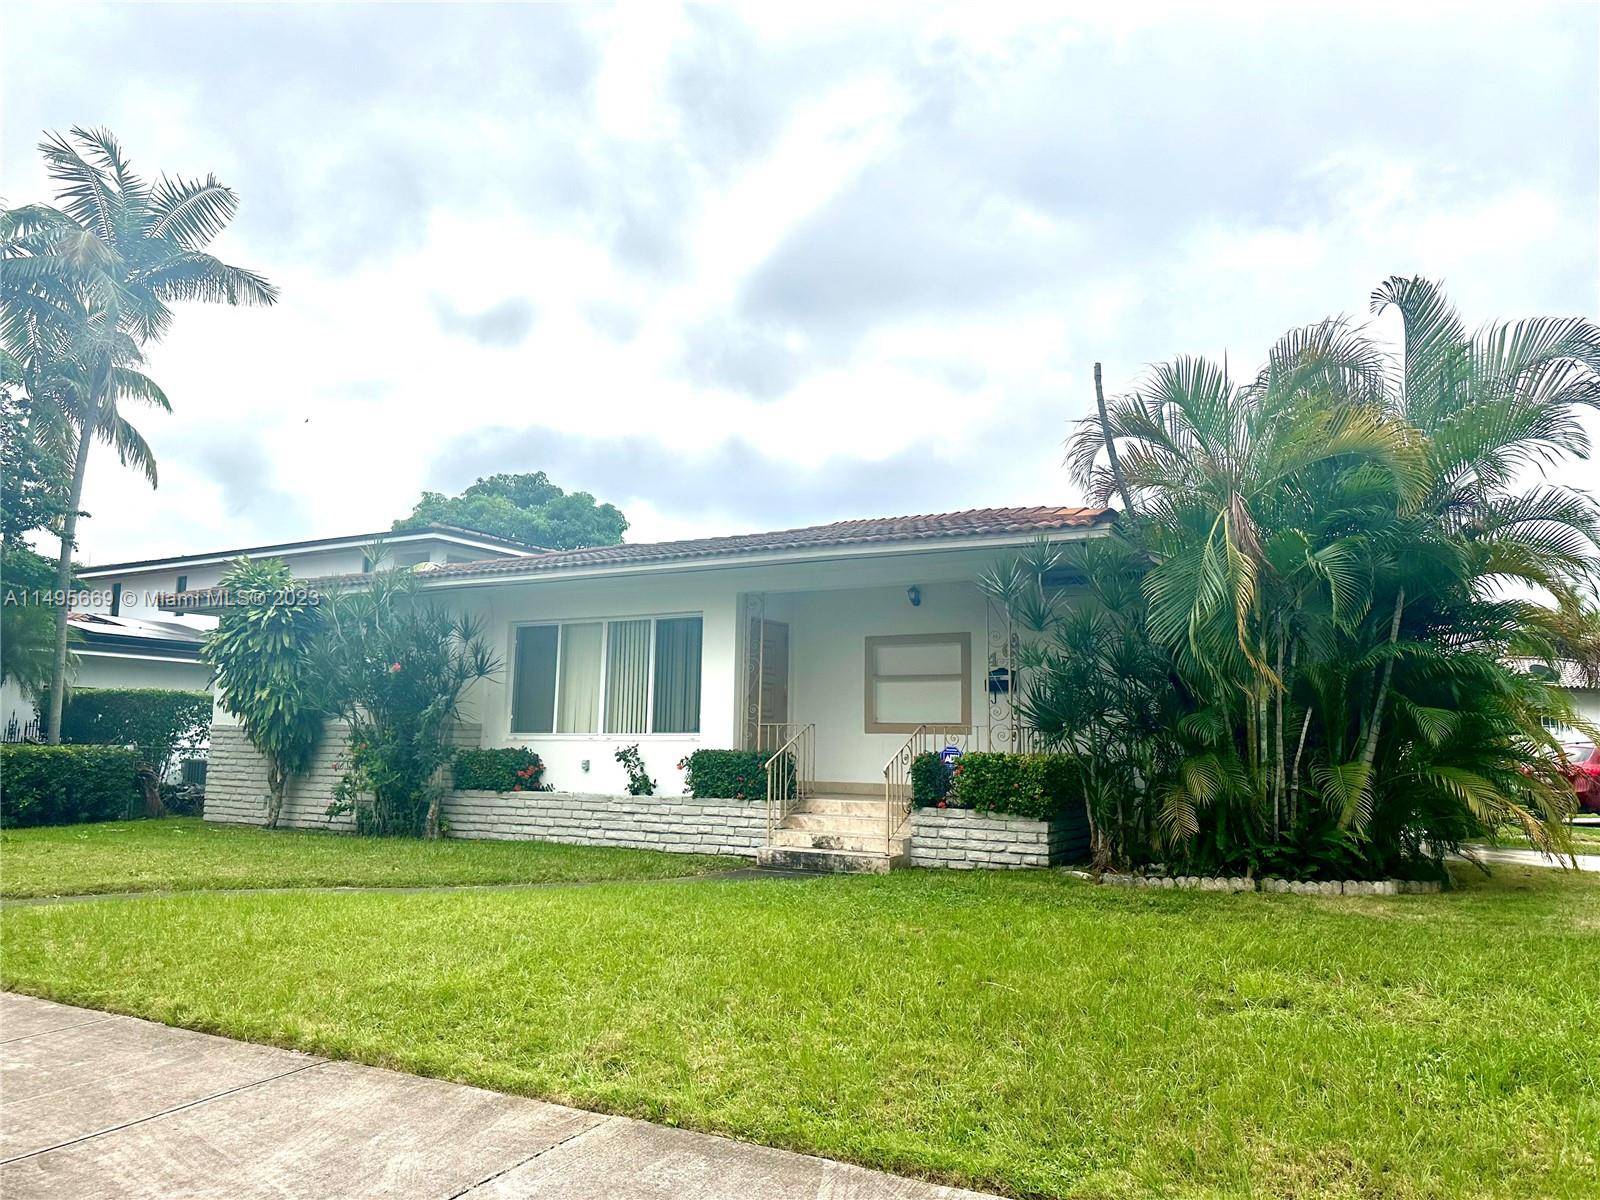 This Coral gables story single family home has 3 bedrooms and 2 full bathrooms.